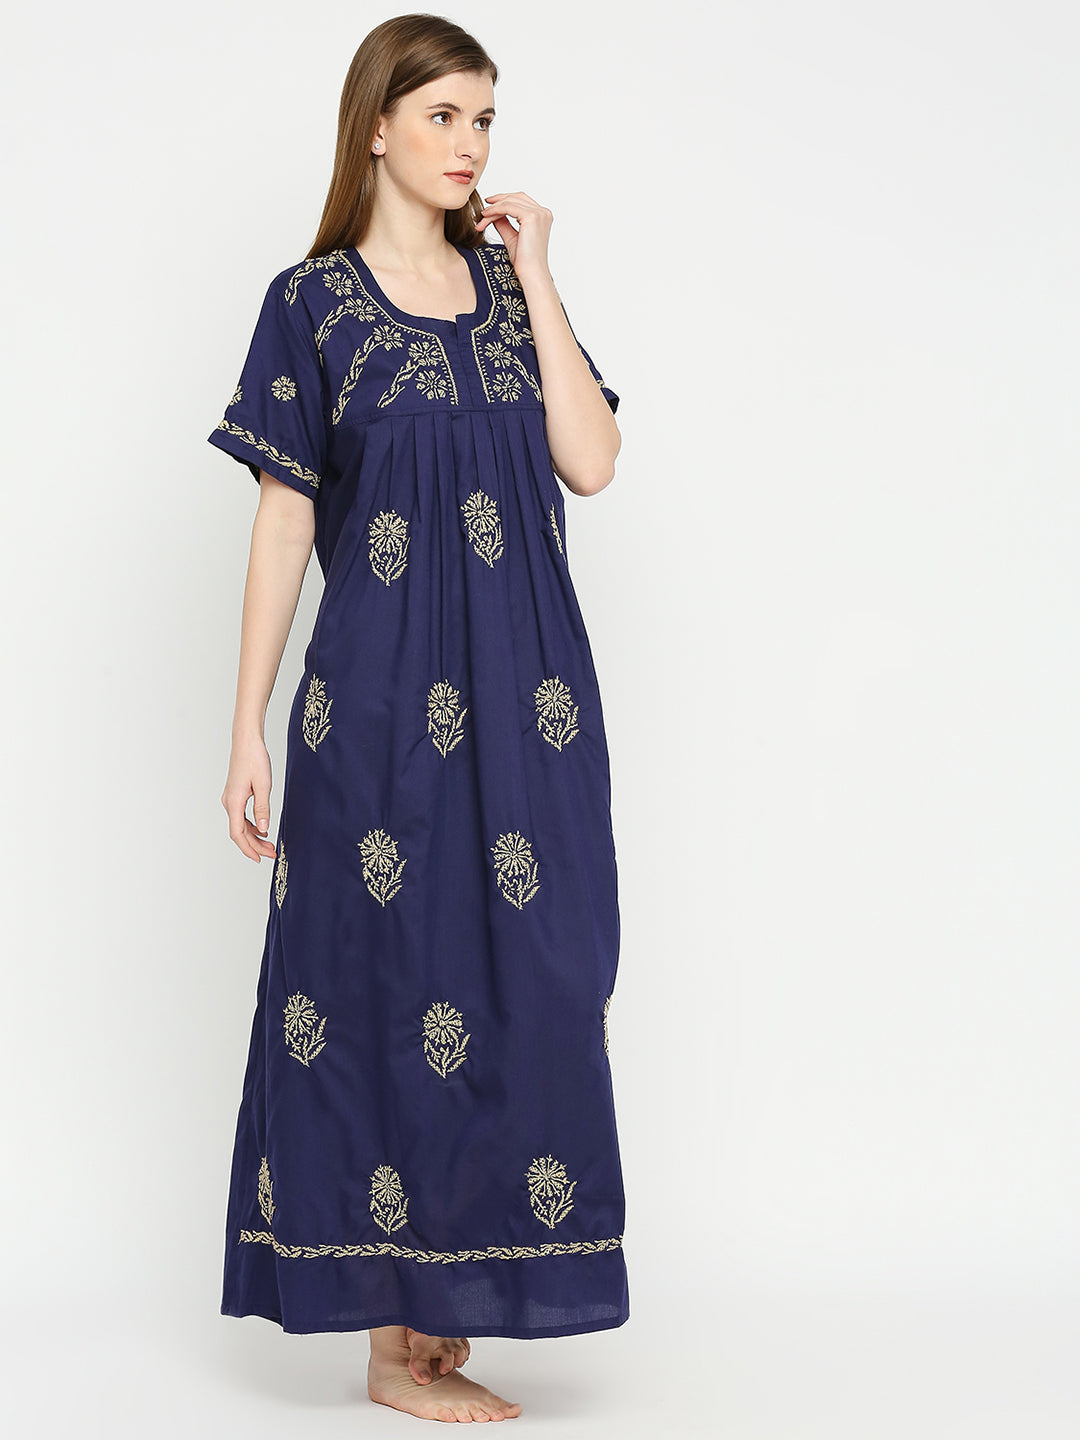 Ladies Fancy Cotton Printed Night Gown